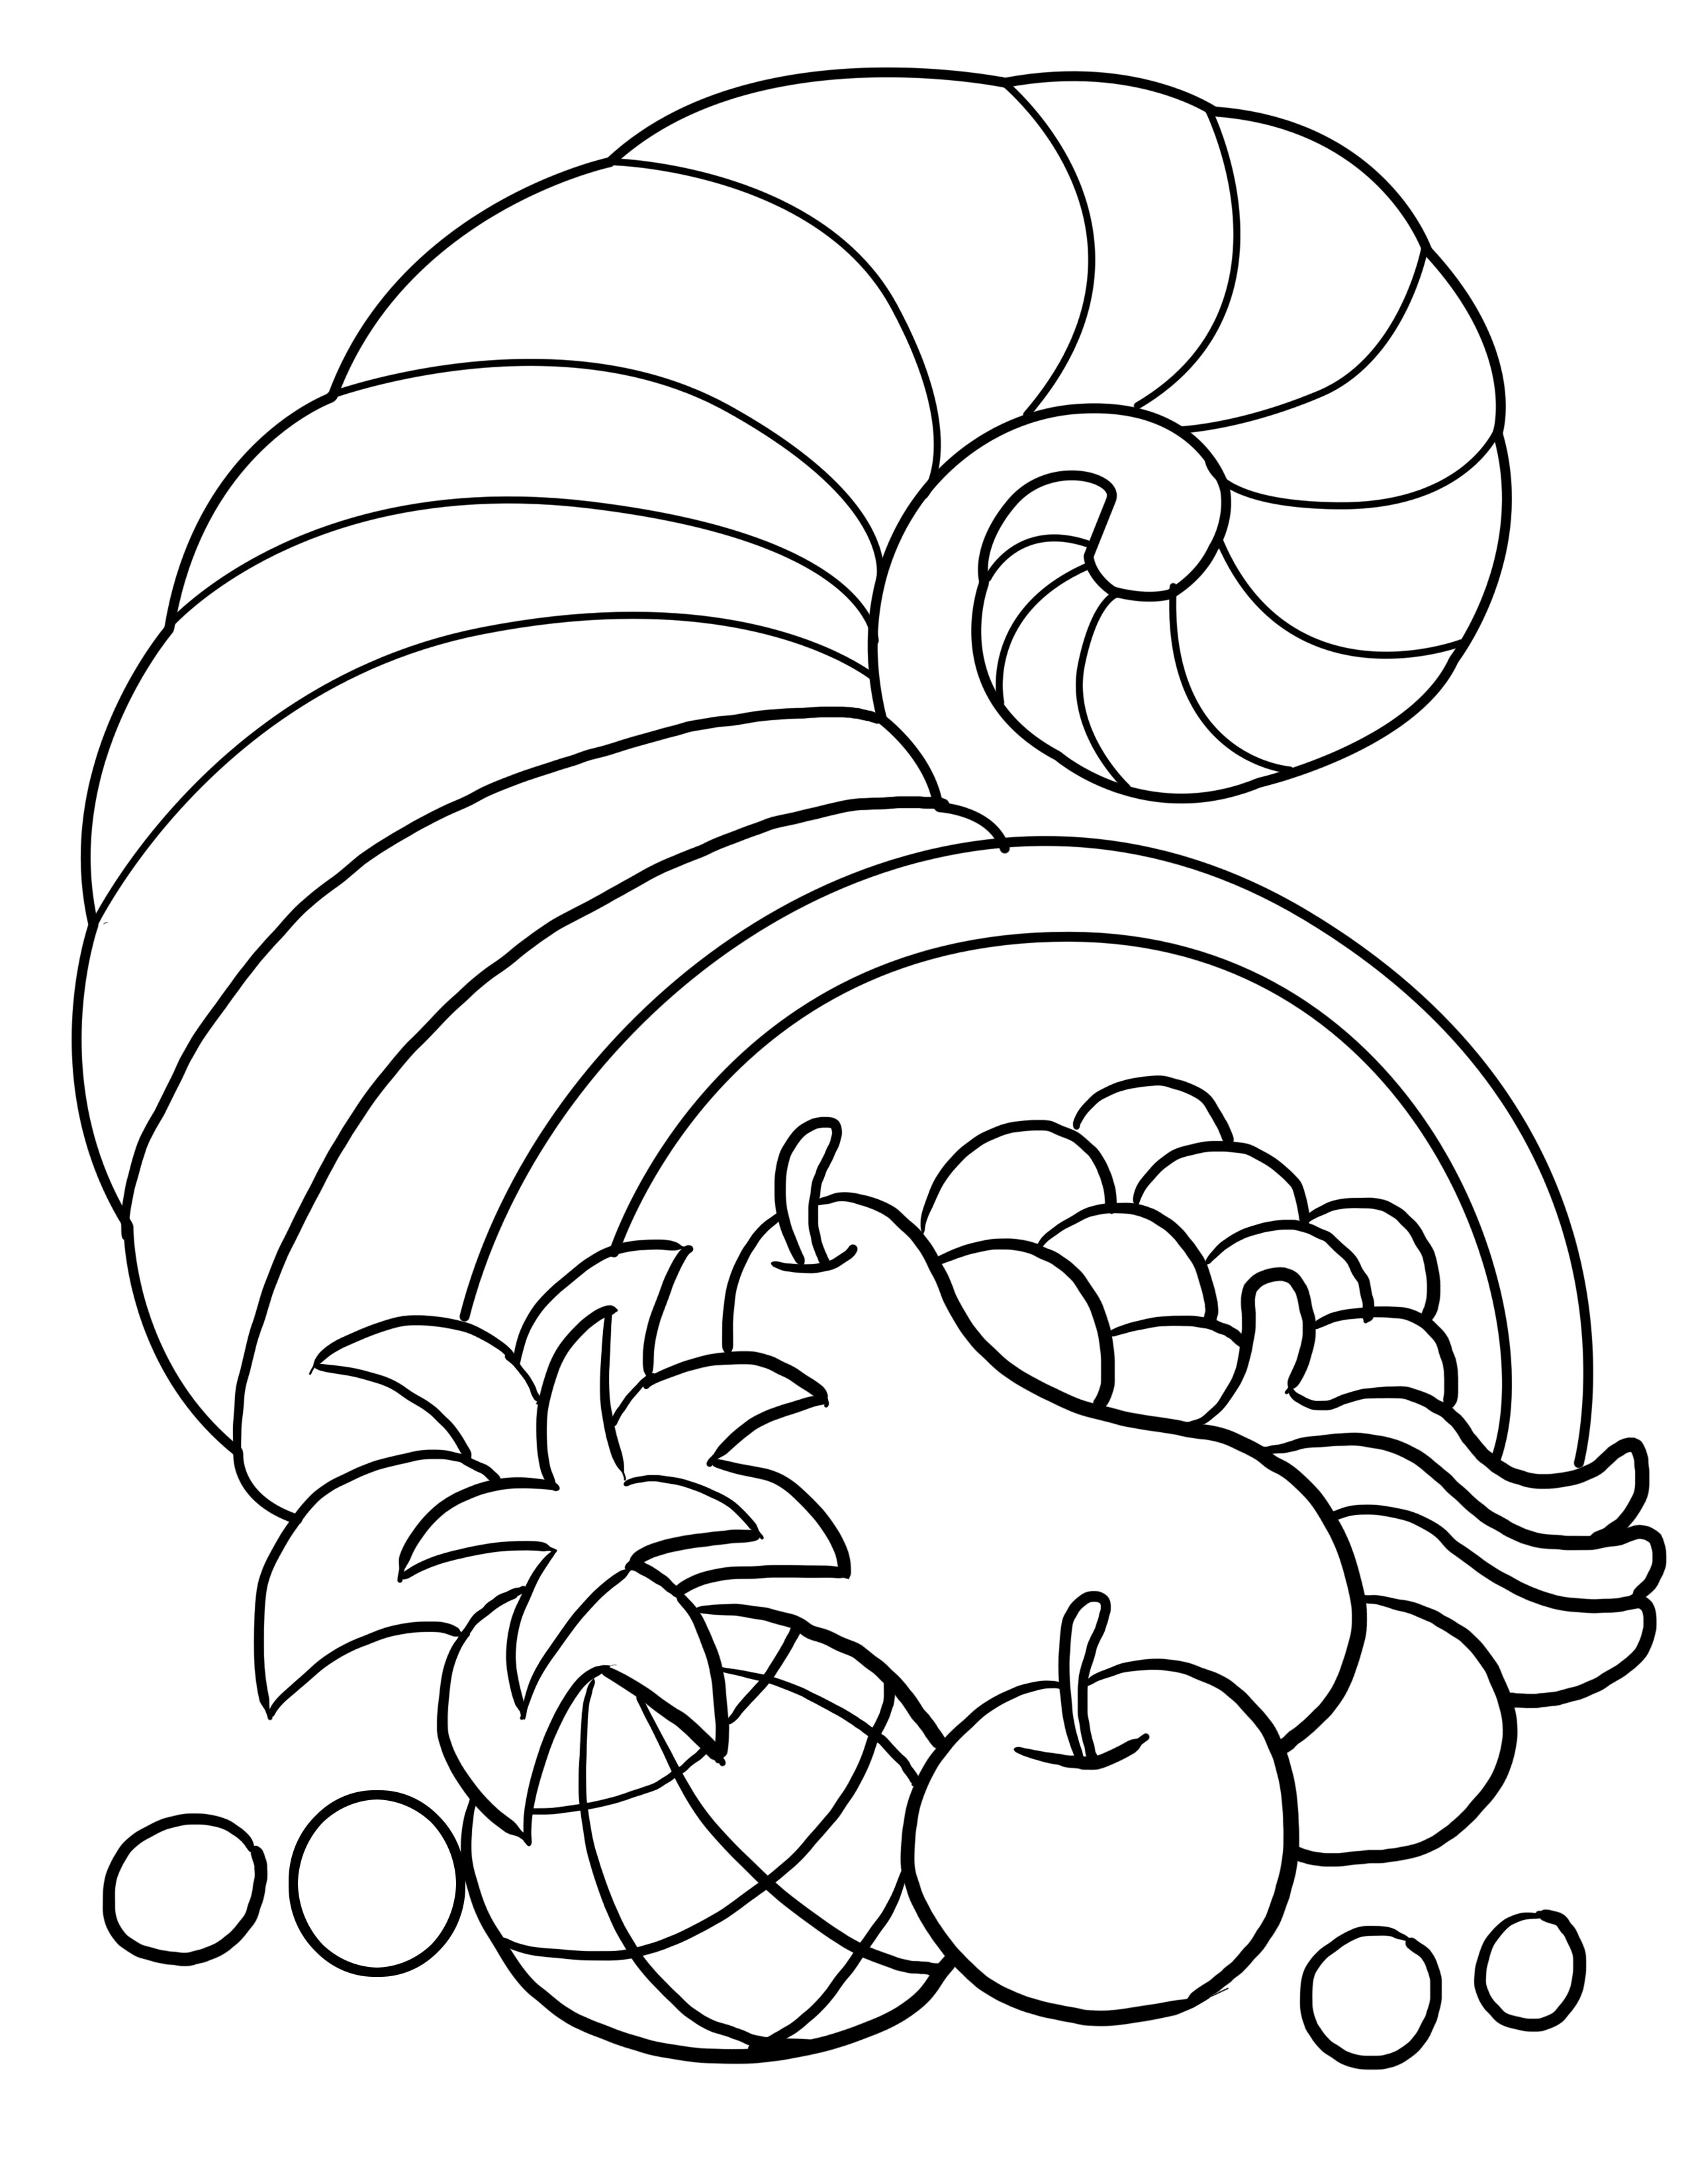 Thanksgiving Coloring Pages For Preschoolers
 Thanksgiving Coloring Pages